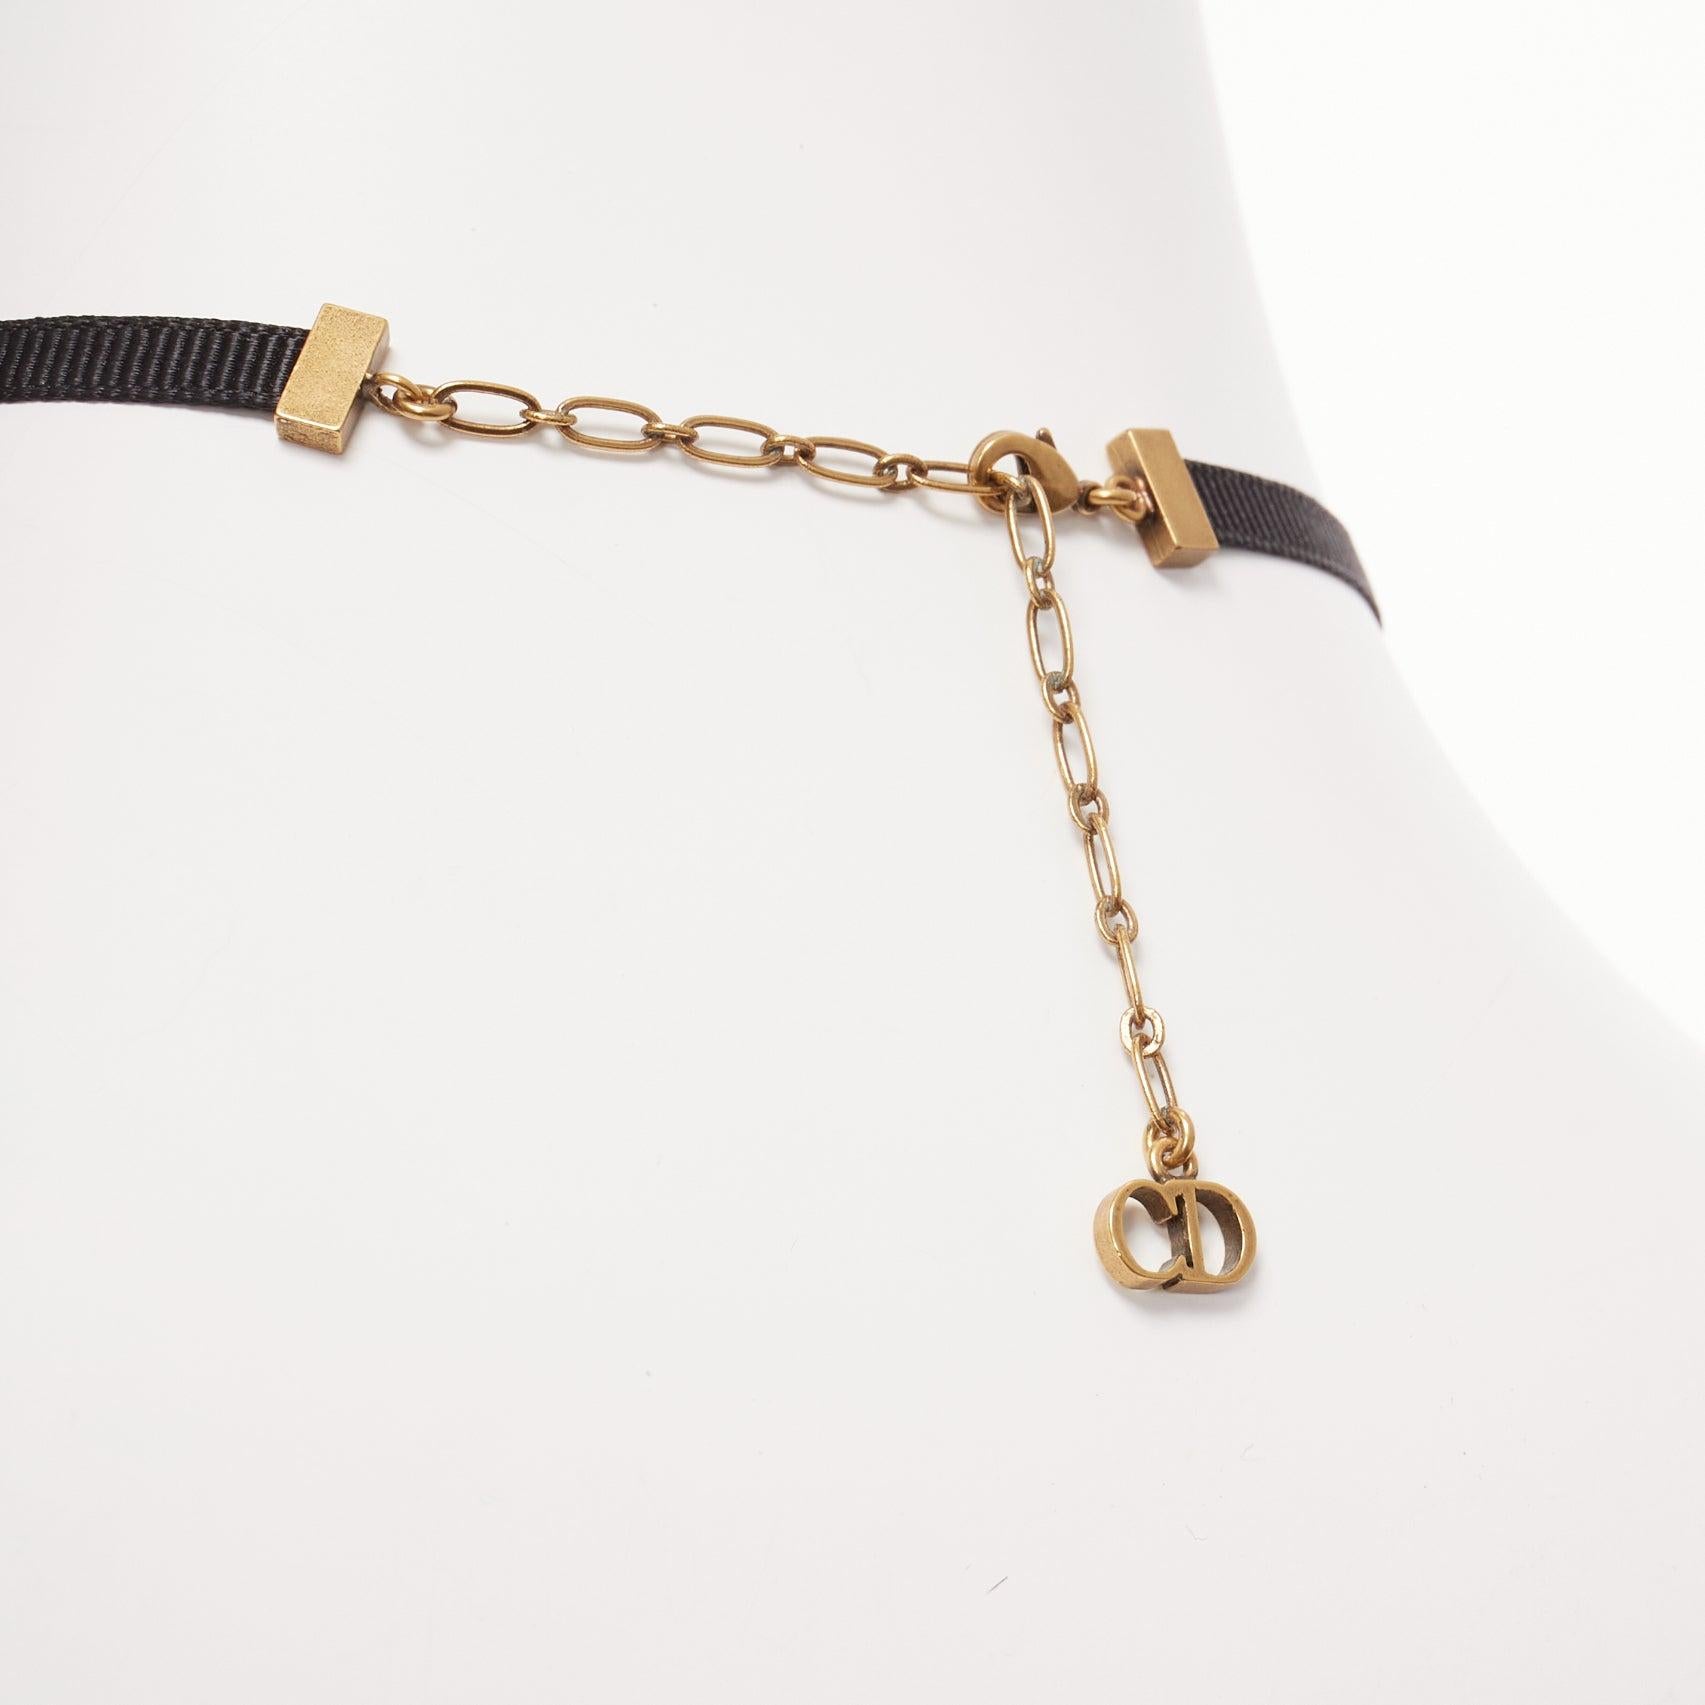 DIOR J'adior antique gold logo plate black ribbon CD charm choker necklace
Reference: AAWC/A00921
Brand: Dior
Designer: Maria Grazia Chiuri
Collection: J'adior
Material: Metal, Fabric
Color: Black, Gold
Pattern: Solid
Closure: Lobster Clasp
Lining: